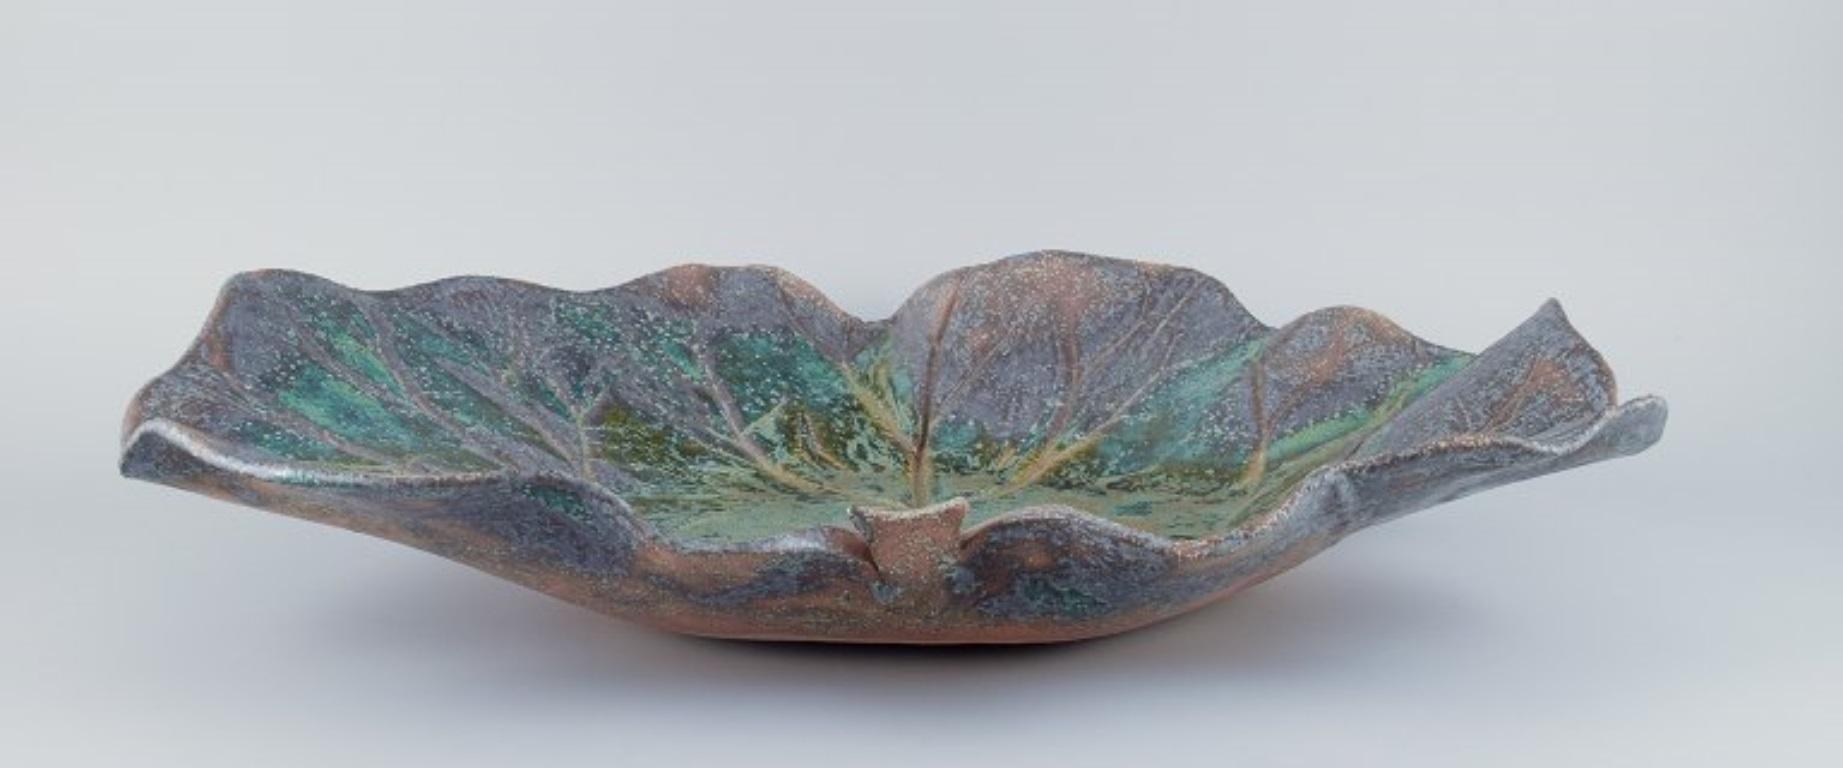 Linda Mathison, Sweden. Colossal leaf-shaped ceramic bowl with glaze in violet, green, and brown hues. High-quality contemporary ceramics.
Signed on the front and back. LM 04
Dated 2004.
Perfect condition.
Dimensions: D 58.0 cm x H 48.5 cm x D 10.0